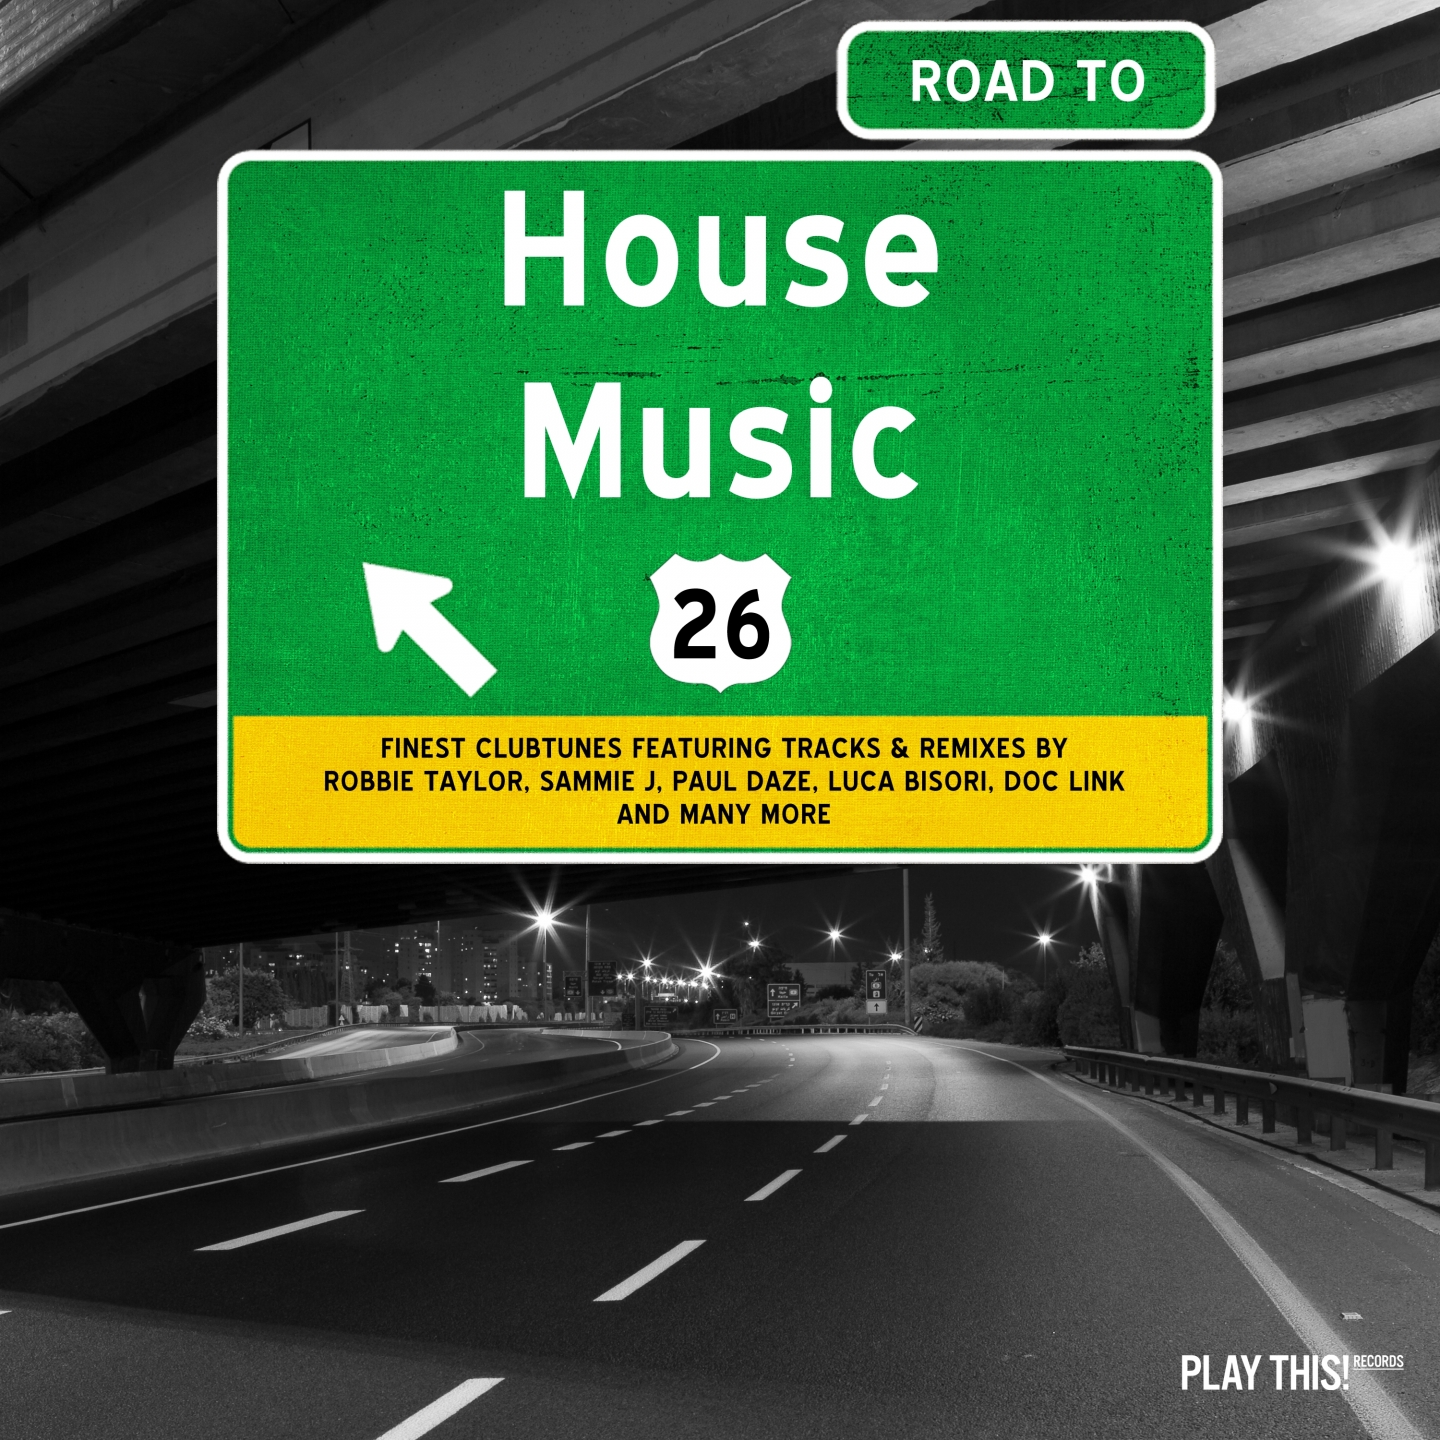 Move With You (House Hustler Remix)